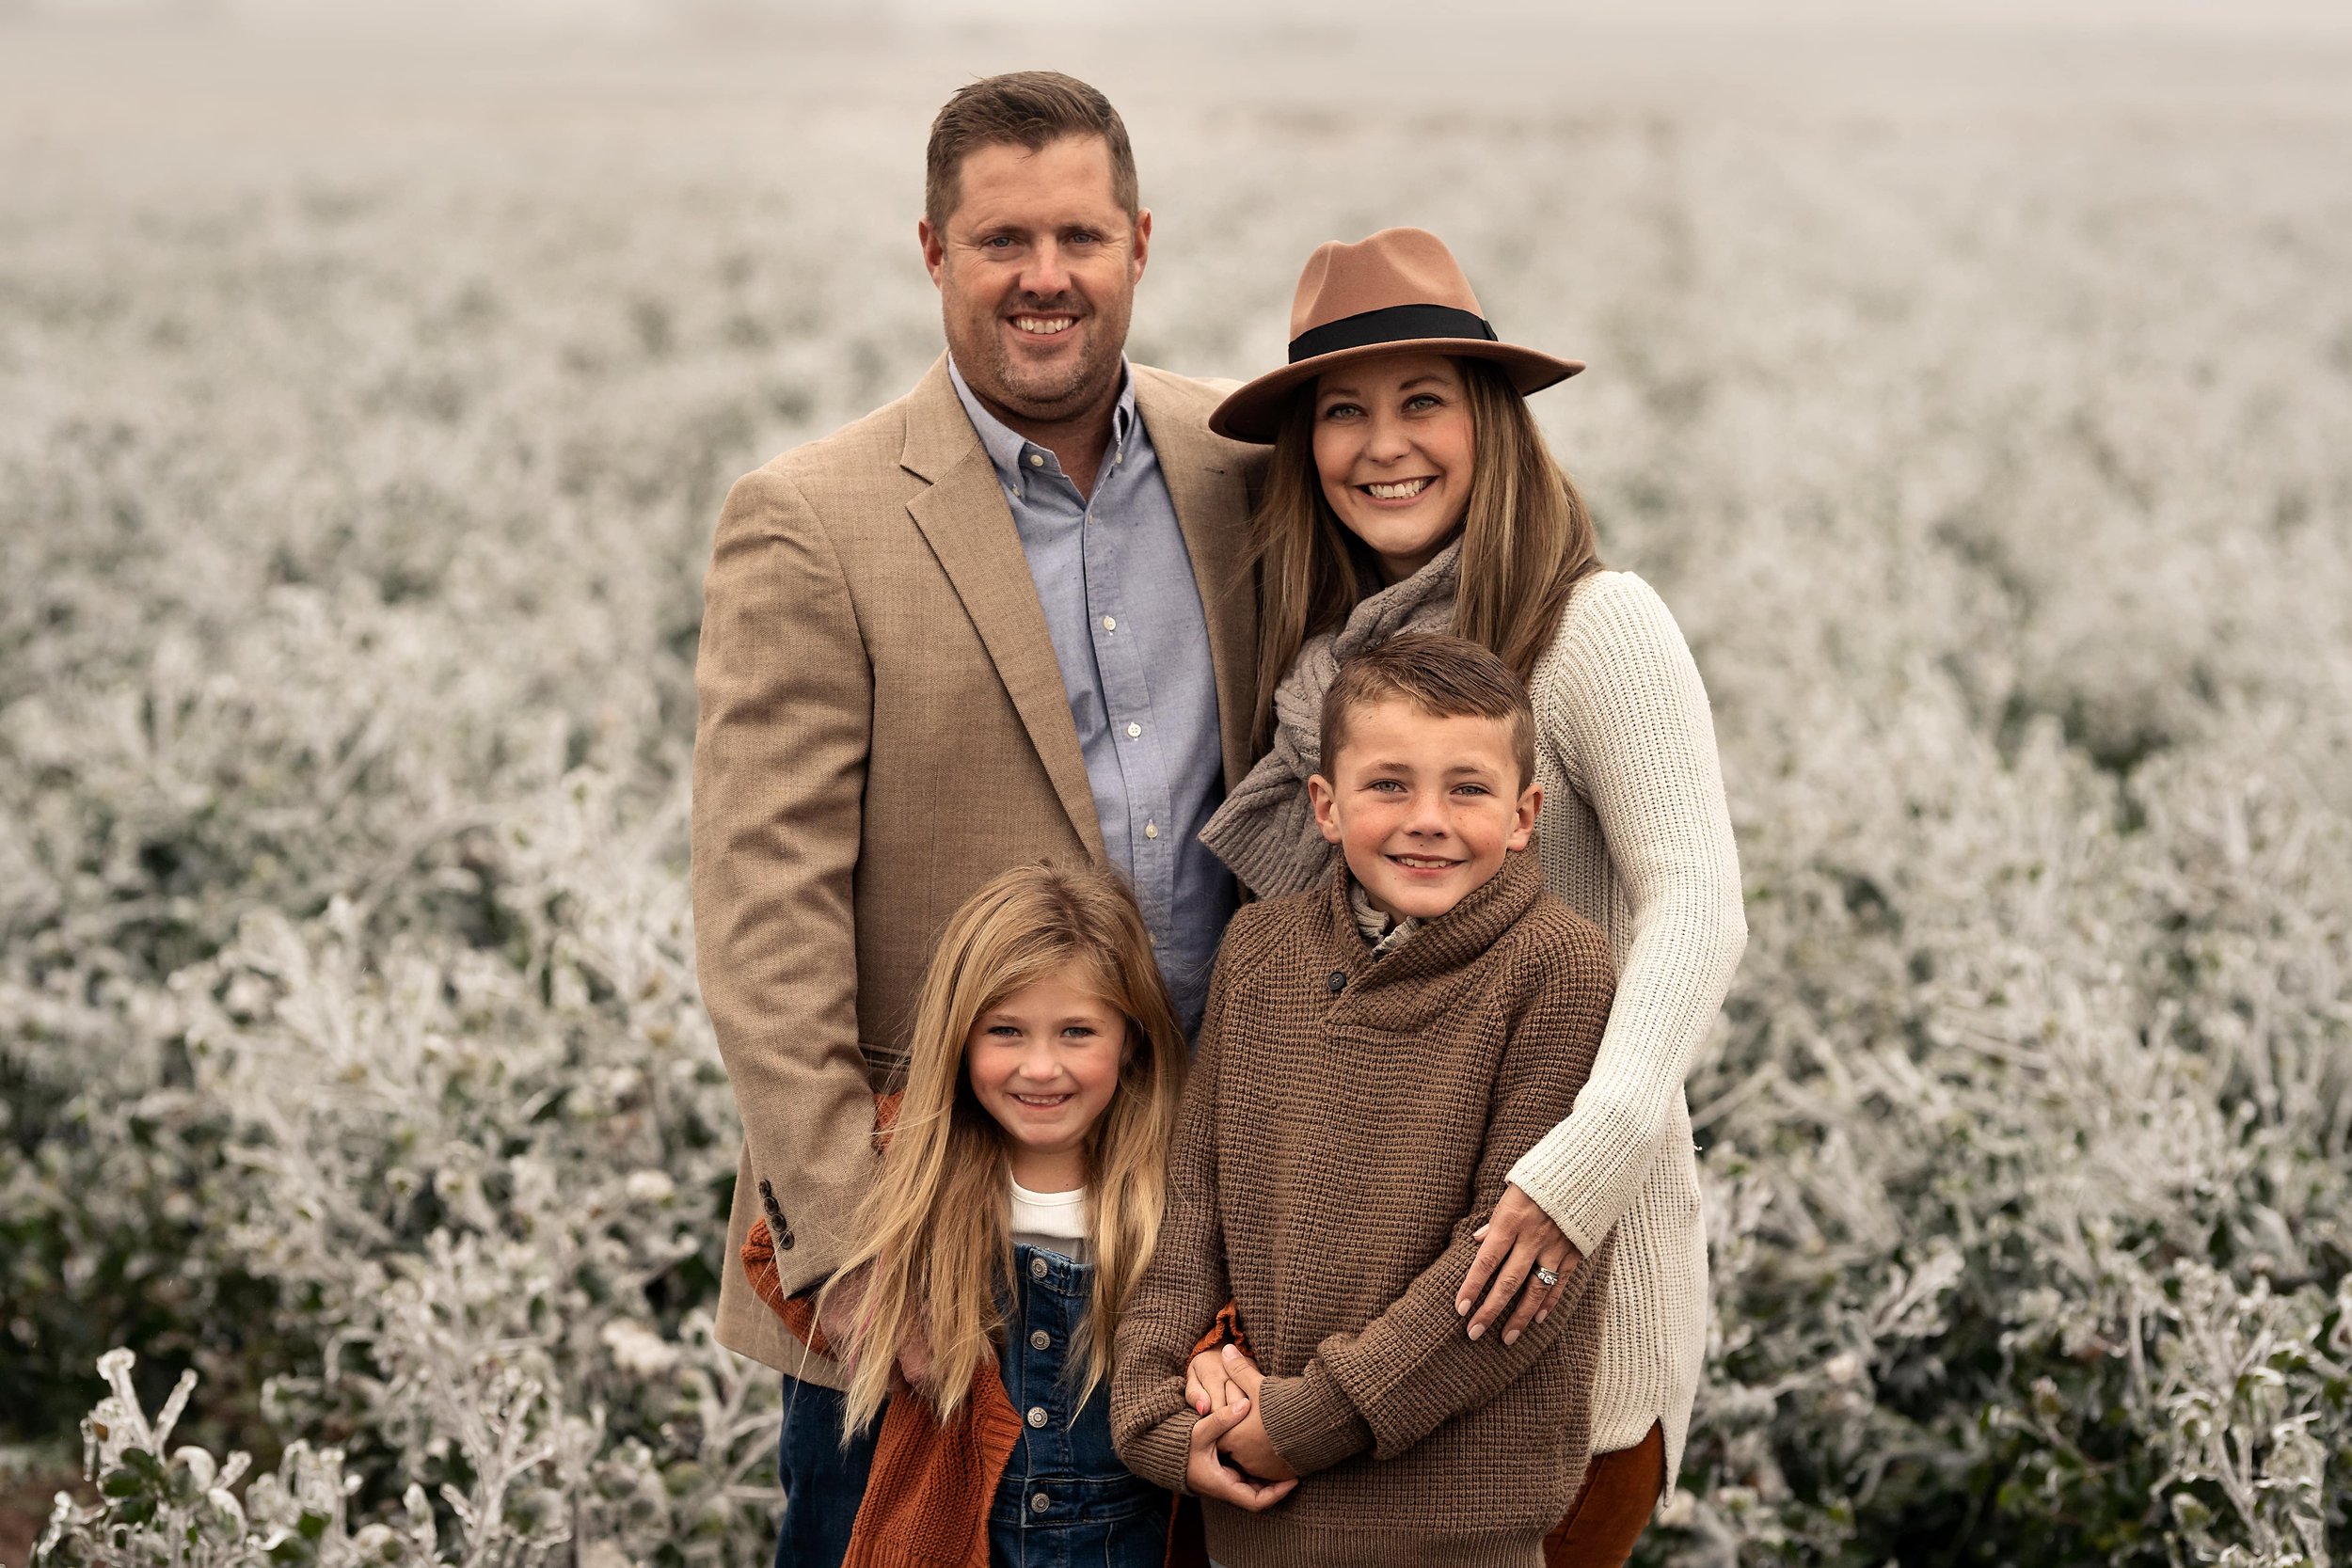 Angie Perisse - Portfolio - The Frost as a magical backdrop - Children, Pets, Horses, Family and Studio Photo Shoot in Vernon, Texas, USA.